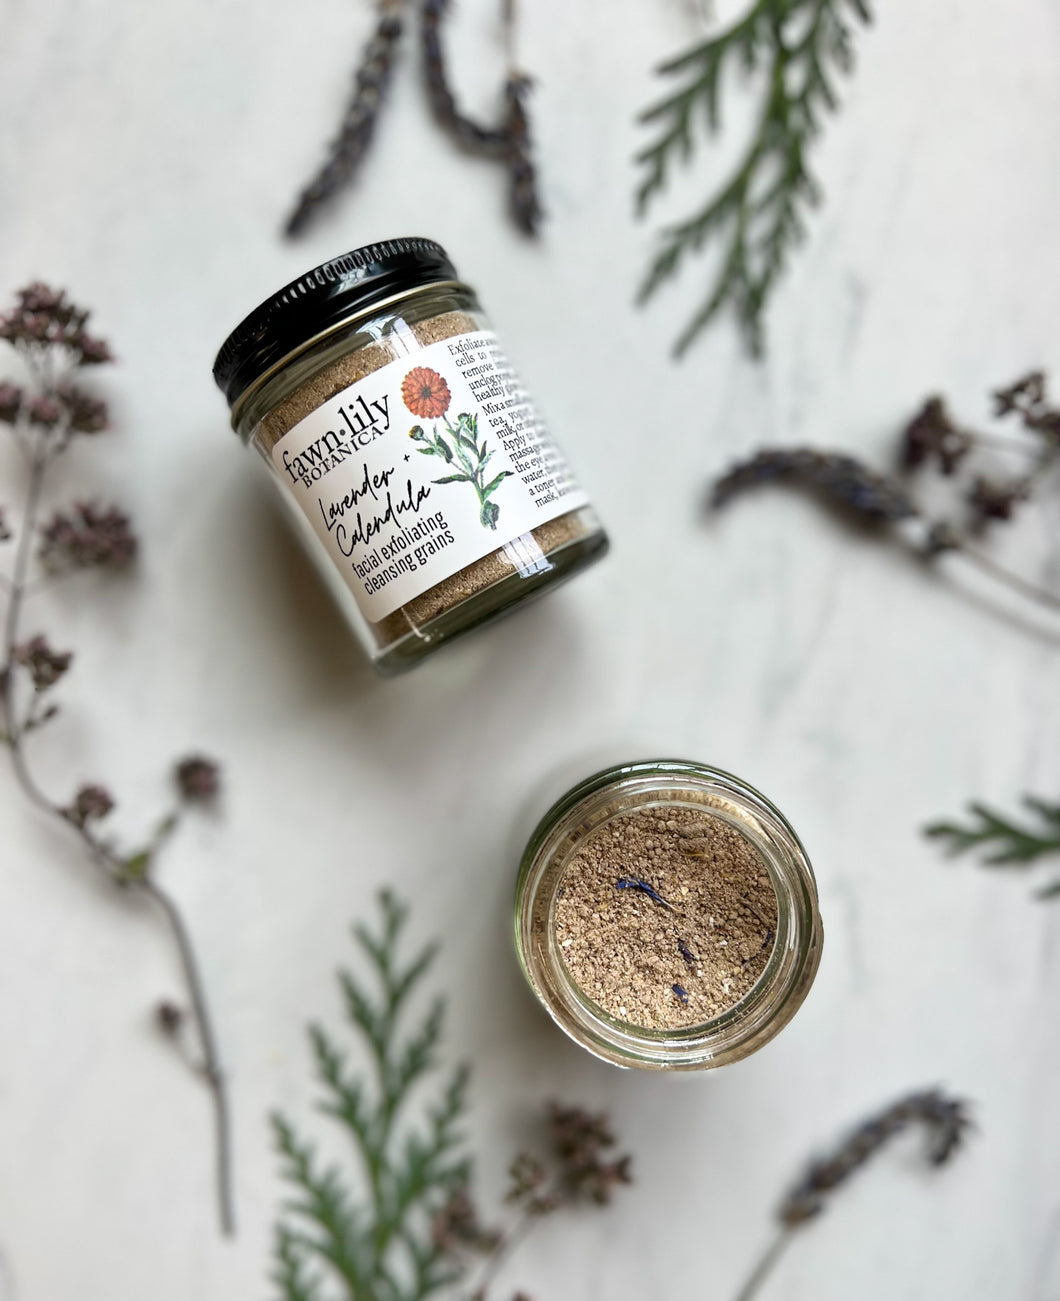 Lavender Calendula Exfoliating Grains | Fawn Lily Botanica. Gentle, effective natural plant-based facial scrub to exfoliate, cleanse & bring a fresh radiant glow! Made from natural organic botanical ingredients